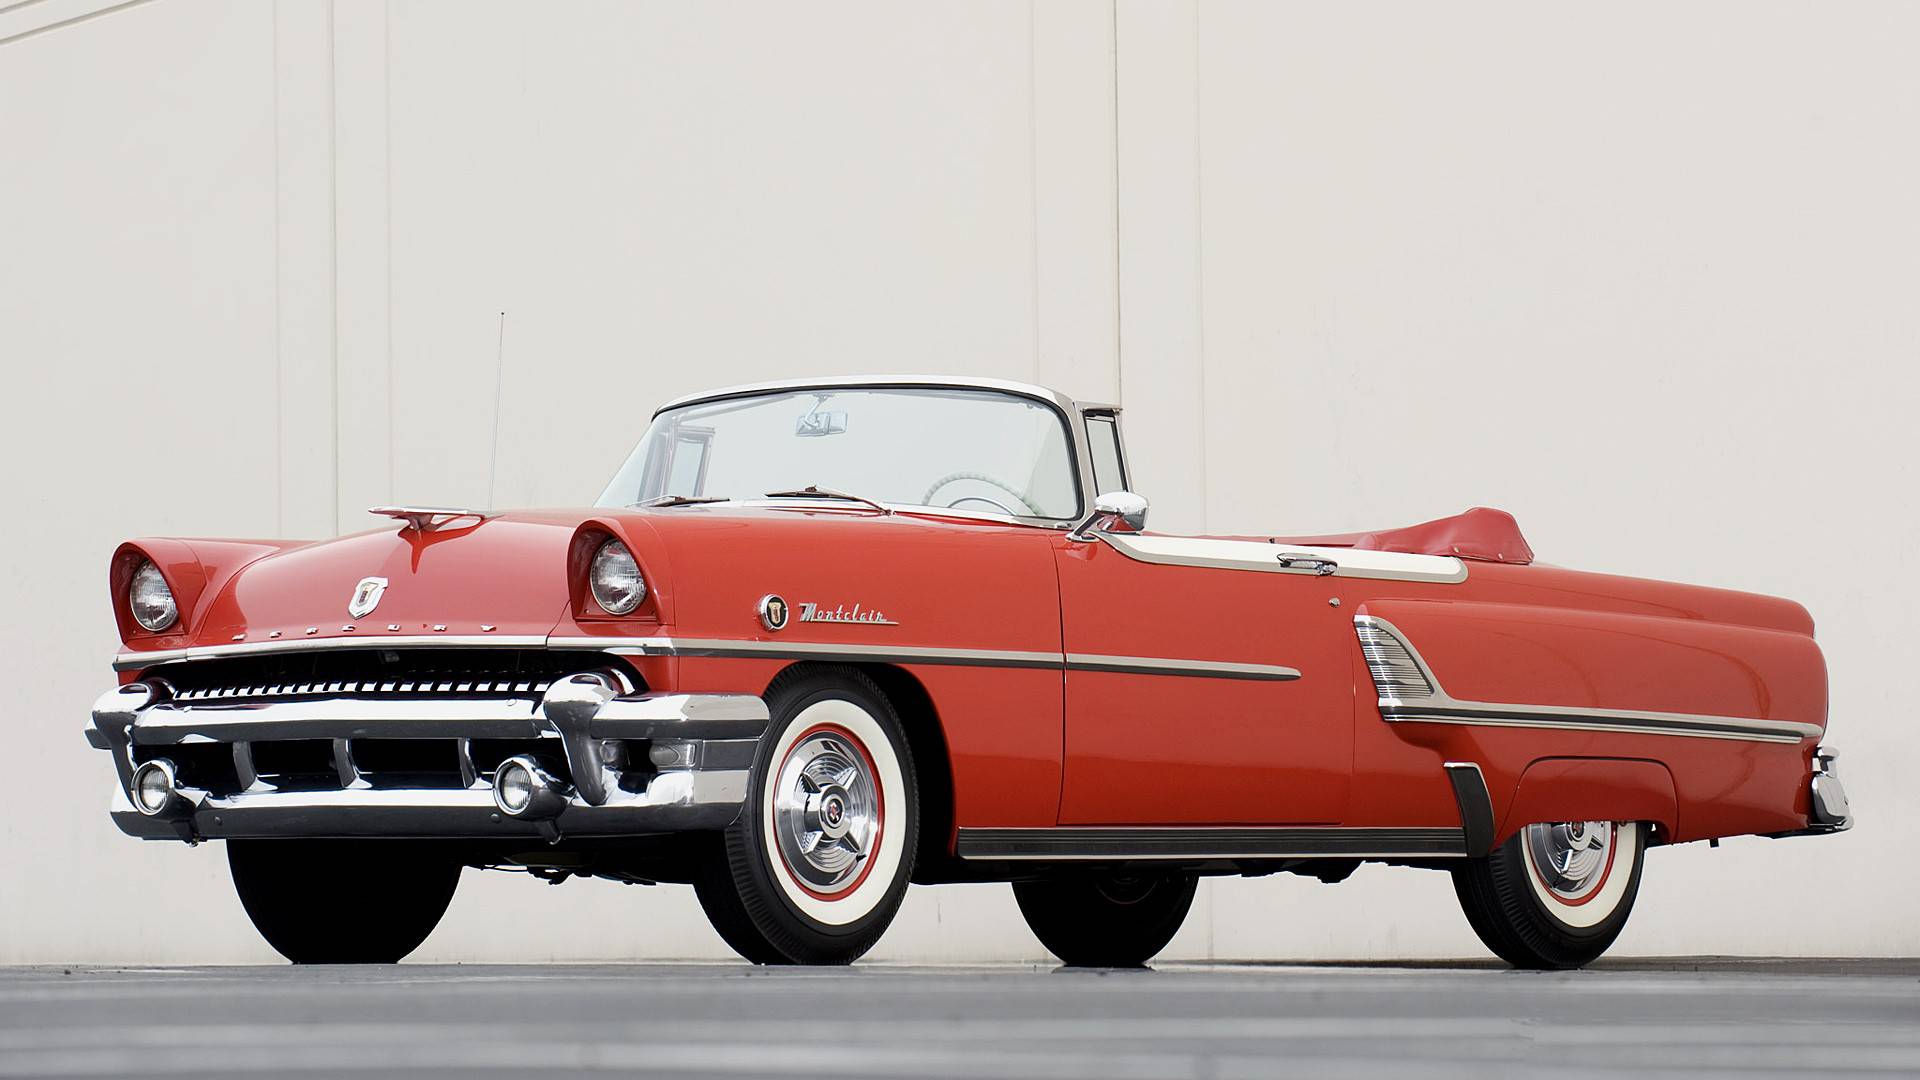 What Should a Buyer Look for in a Vintage Car? | Oak Lawn Toyota Blog